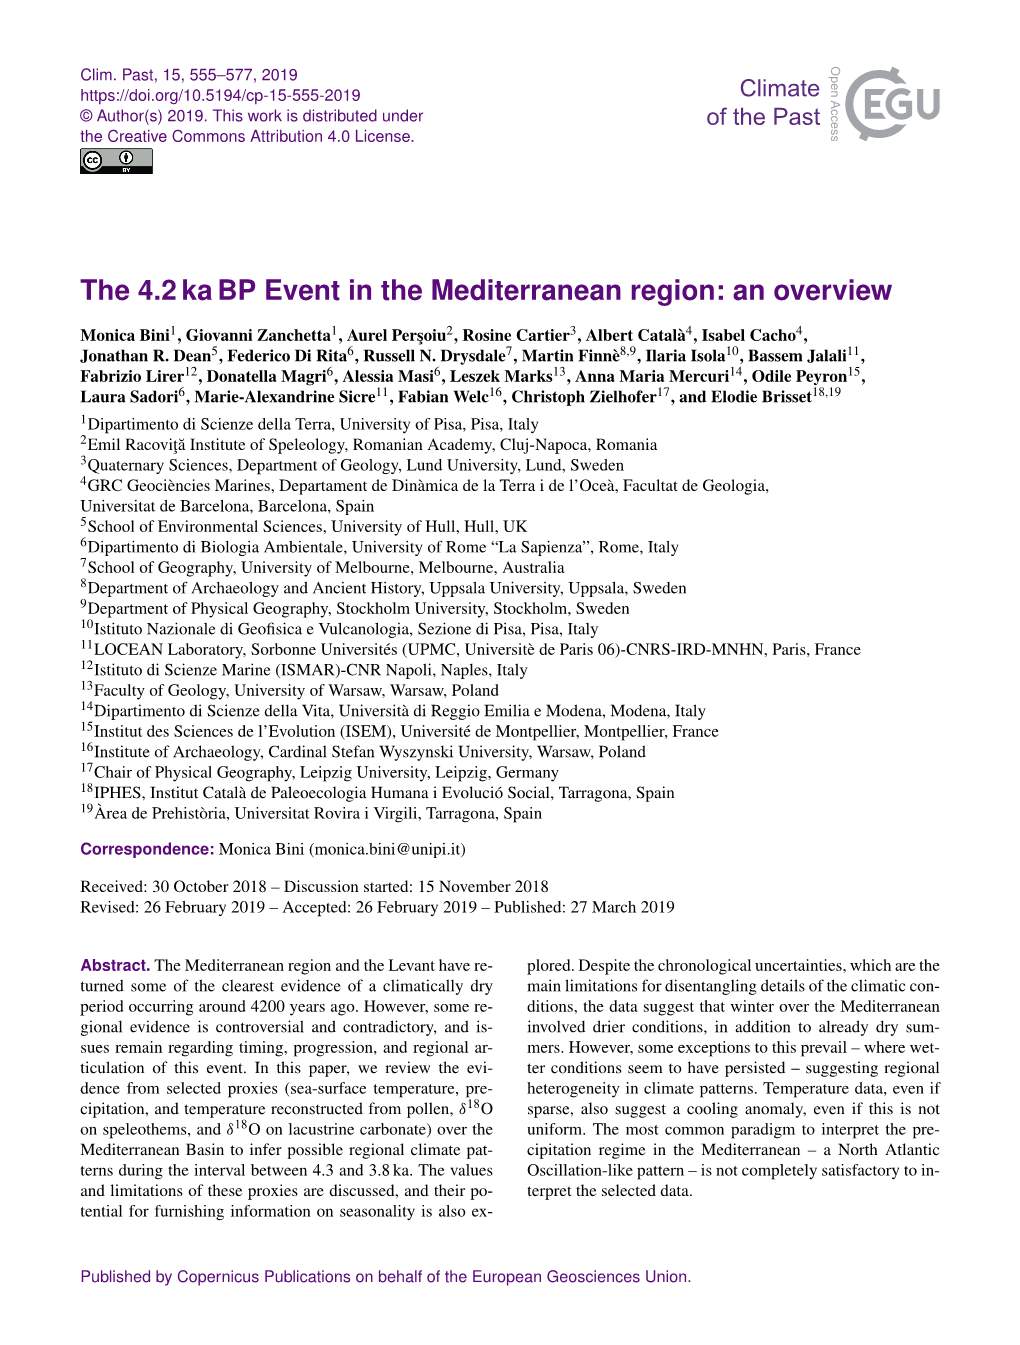 The 4.2 Ka BP Event in the Mediterranean Region: an Overview